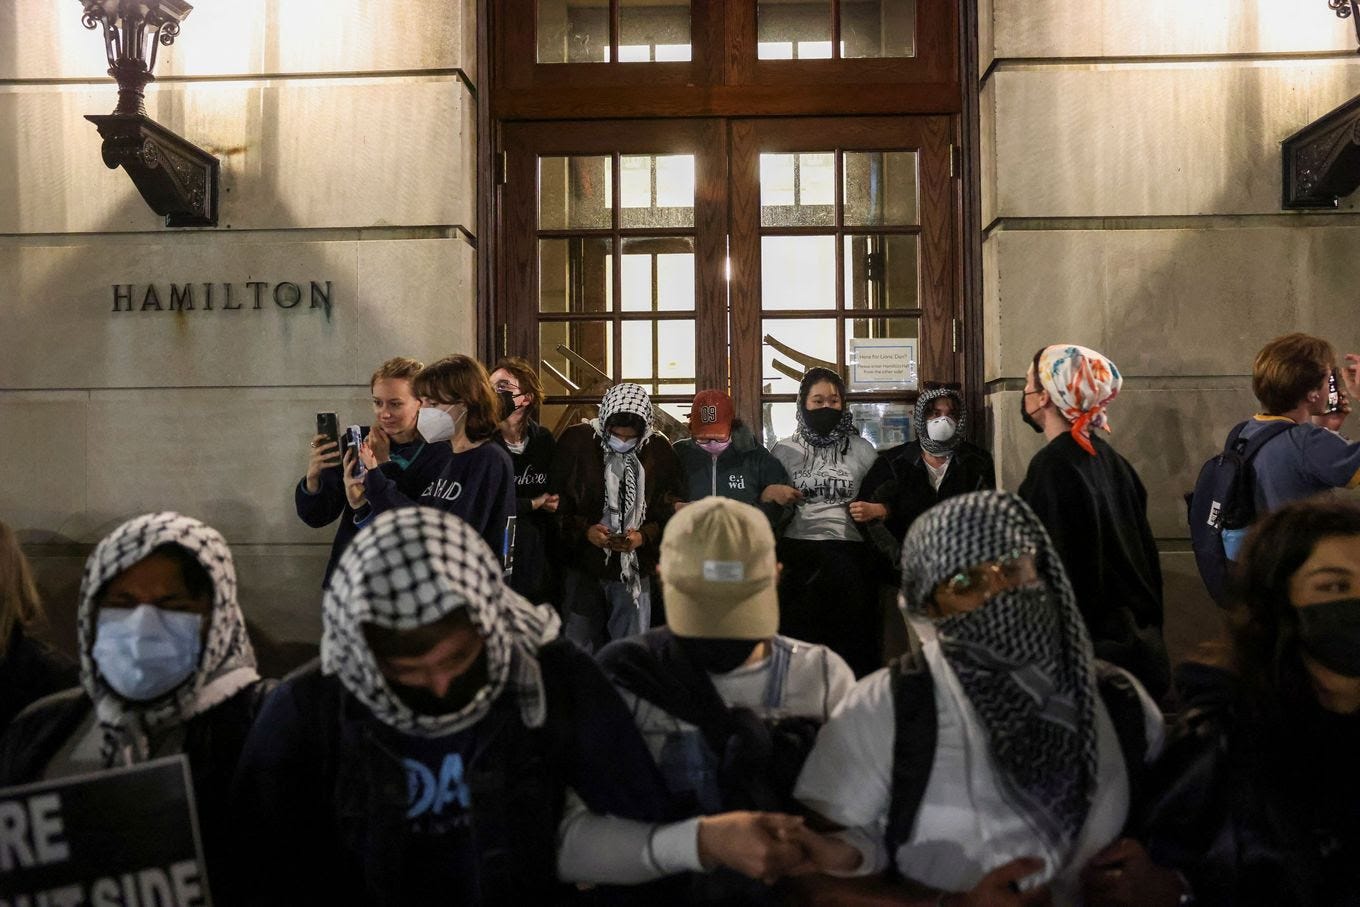 Students barricaded themselves in a building near the Columbia campus’s South Lawn. (Caitlin Ochs/Reuters)